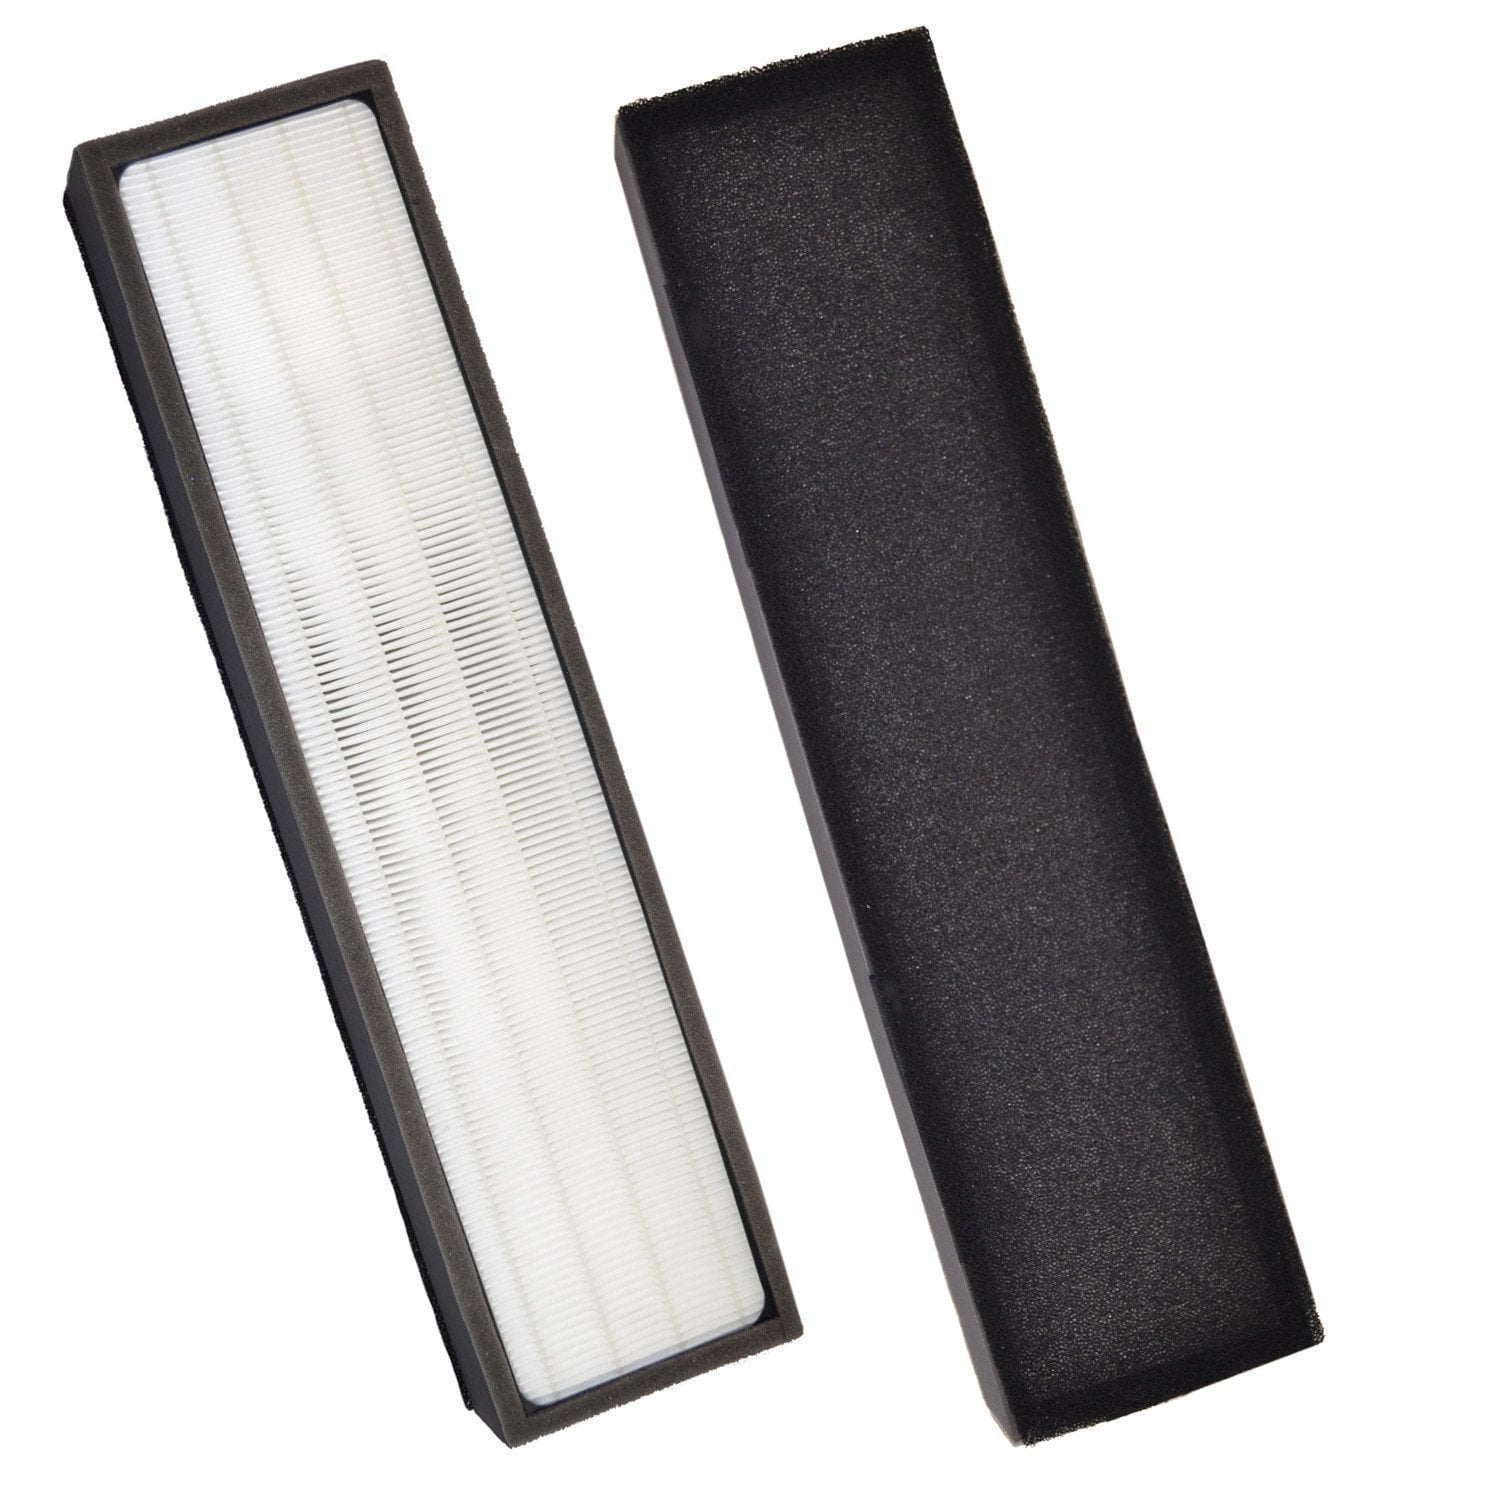 HQRP 2x HEPA Filters B 4x Carbon Filters for GermGuardian PureGuardian Series 